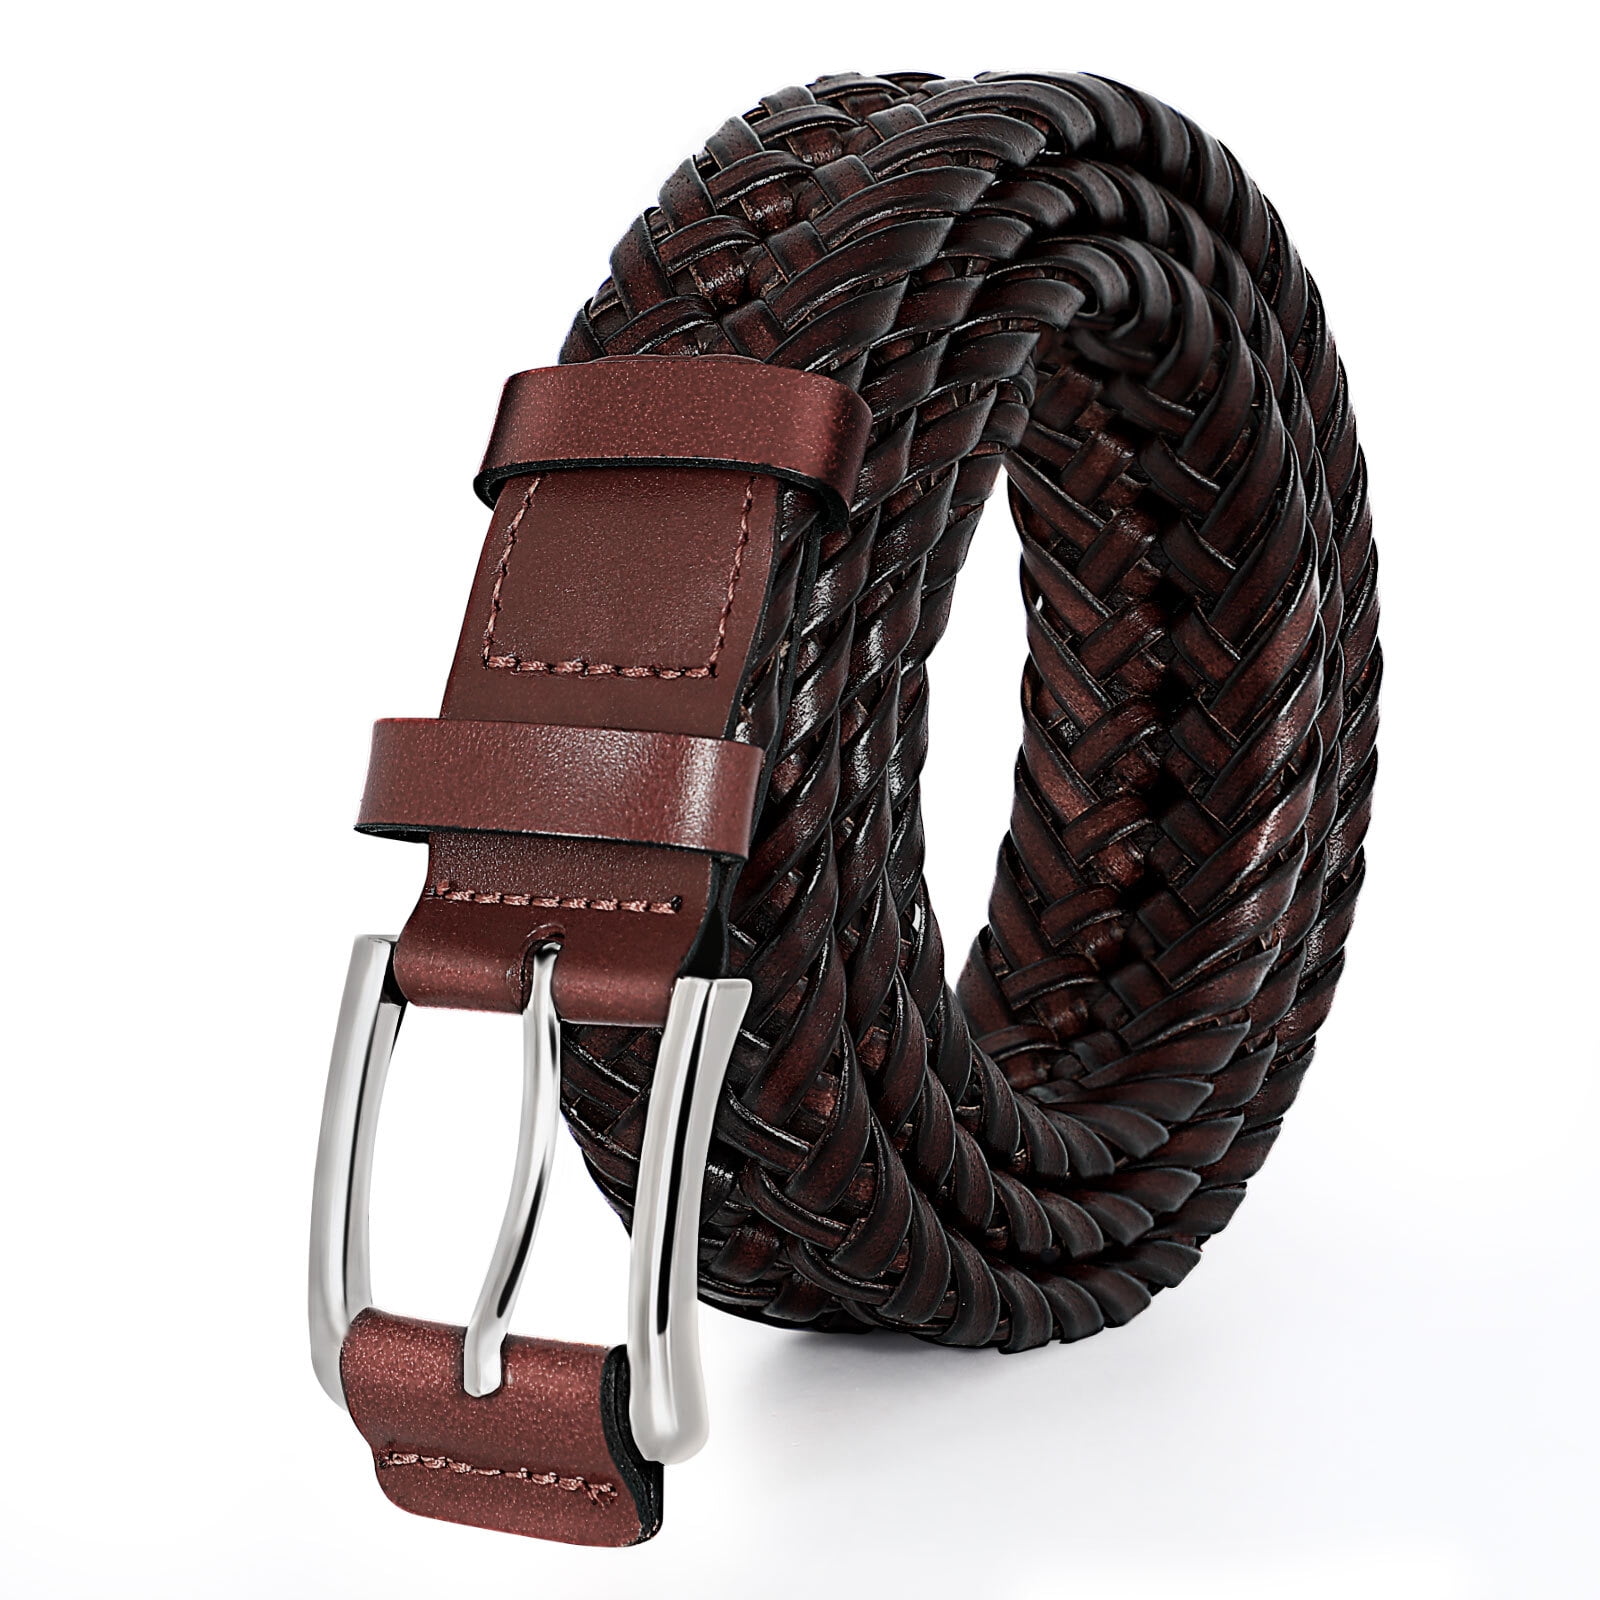 WHIPPY Braided Leather Belts for Men, Mens Woven Belt for Jeans Pants ...